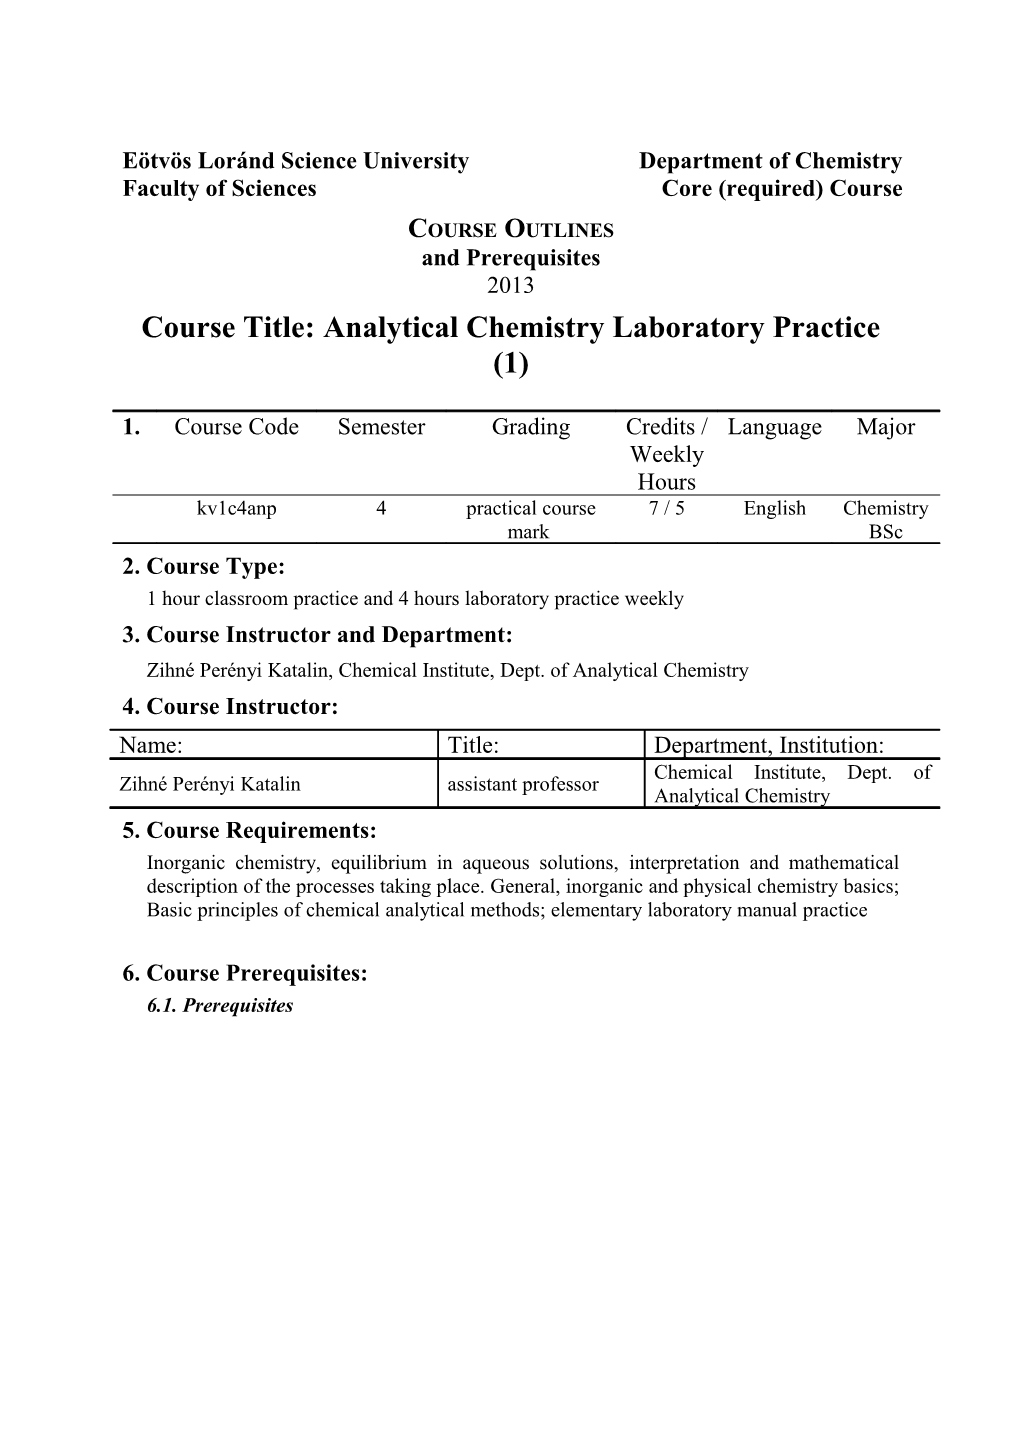 Course Title: Analytical Chemistry Laboratory Practice (1)